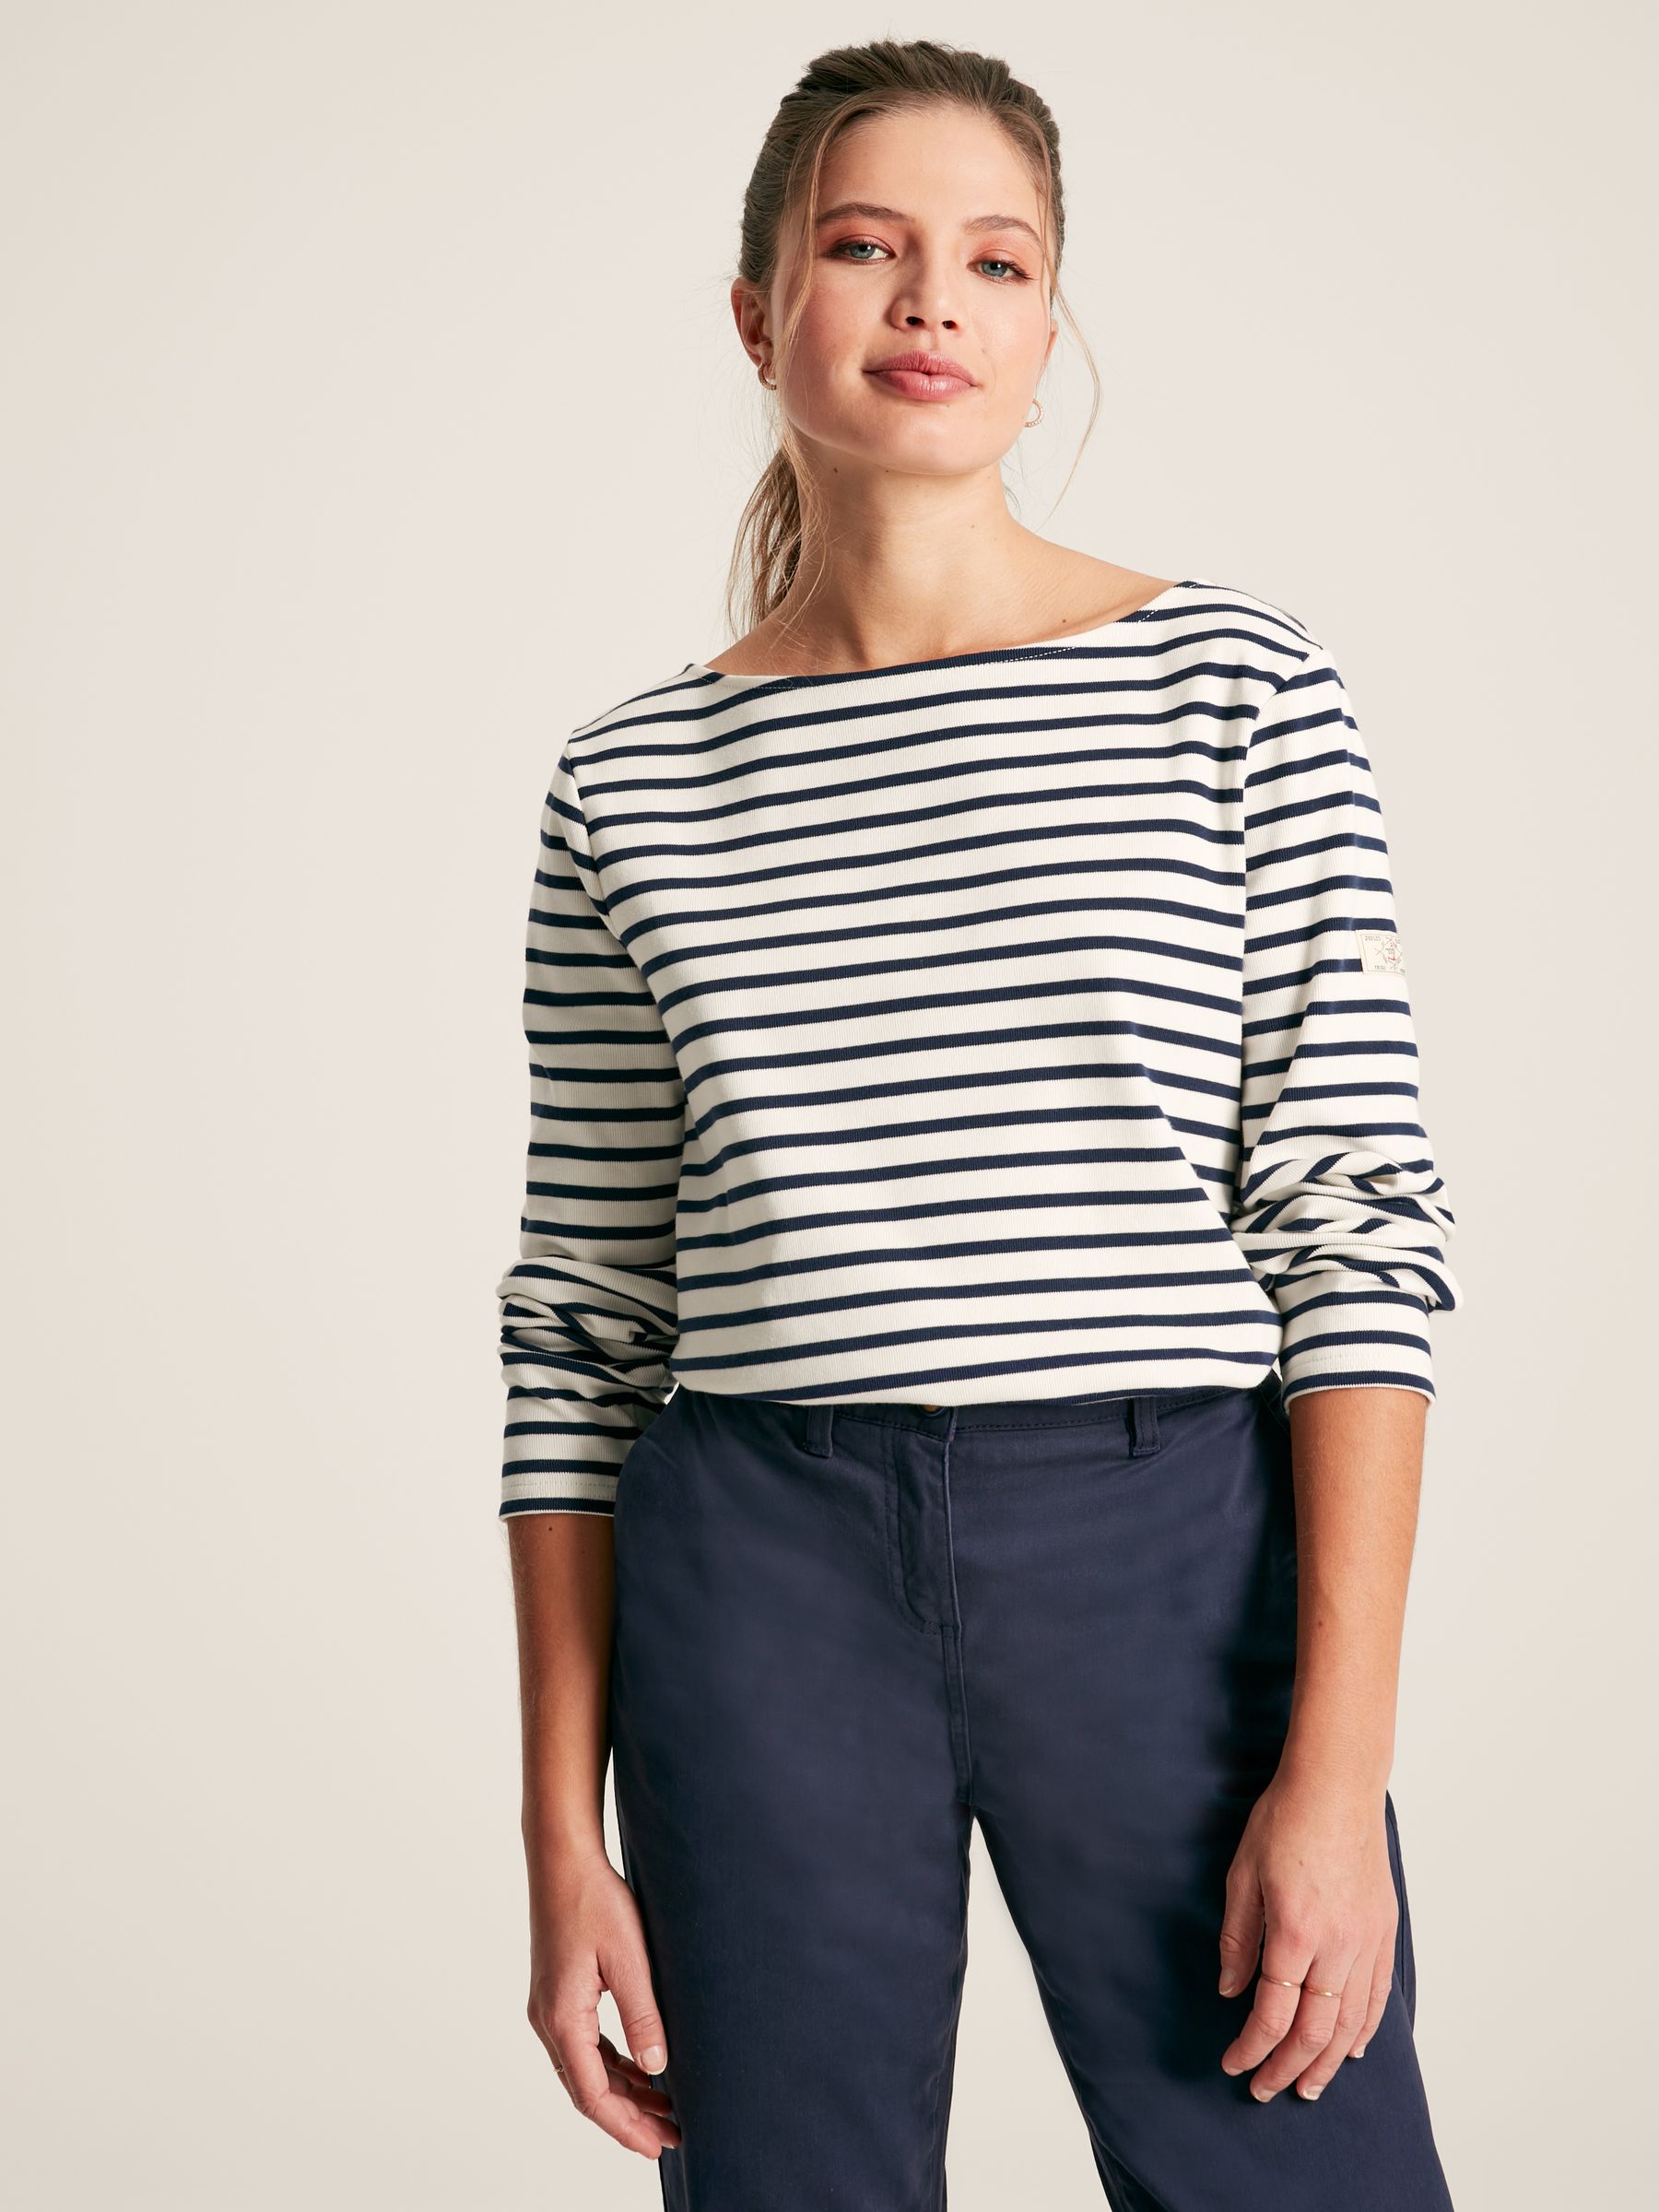 Buy Joules New Harbour Boat Neck Breton Top from the Joules online shop